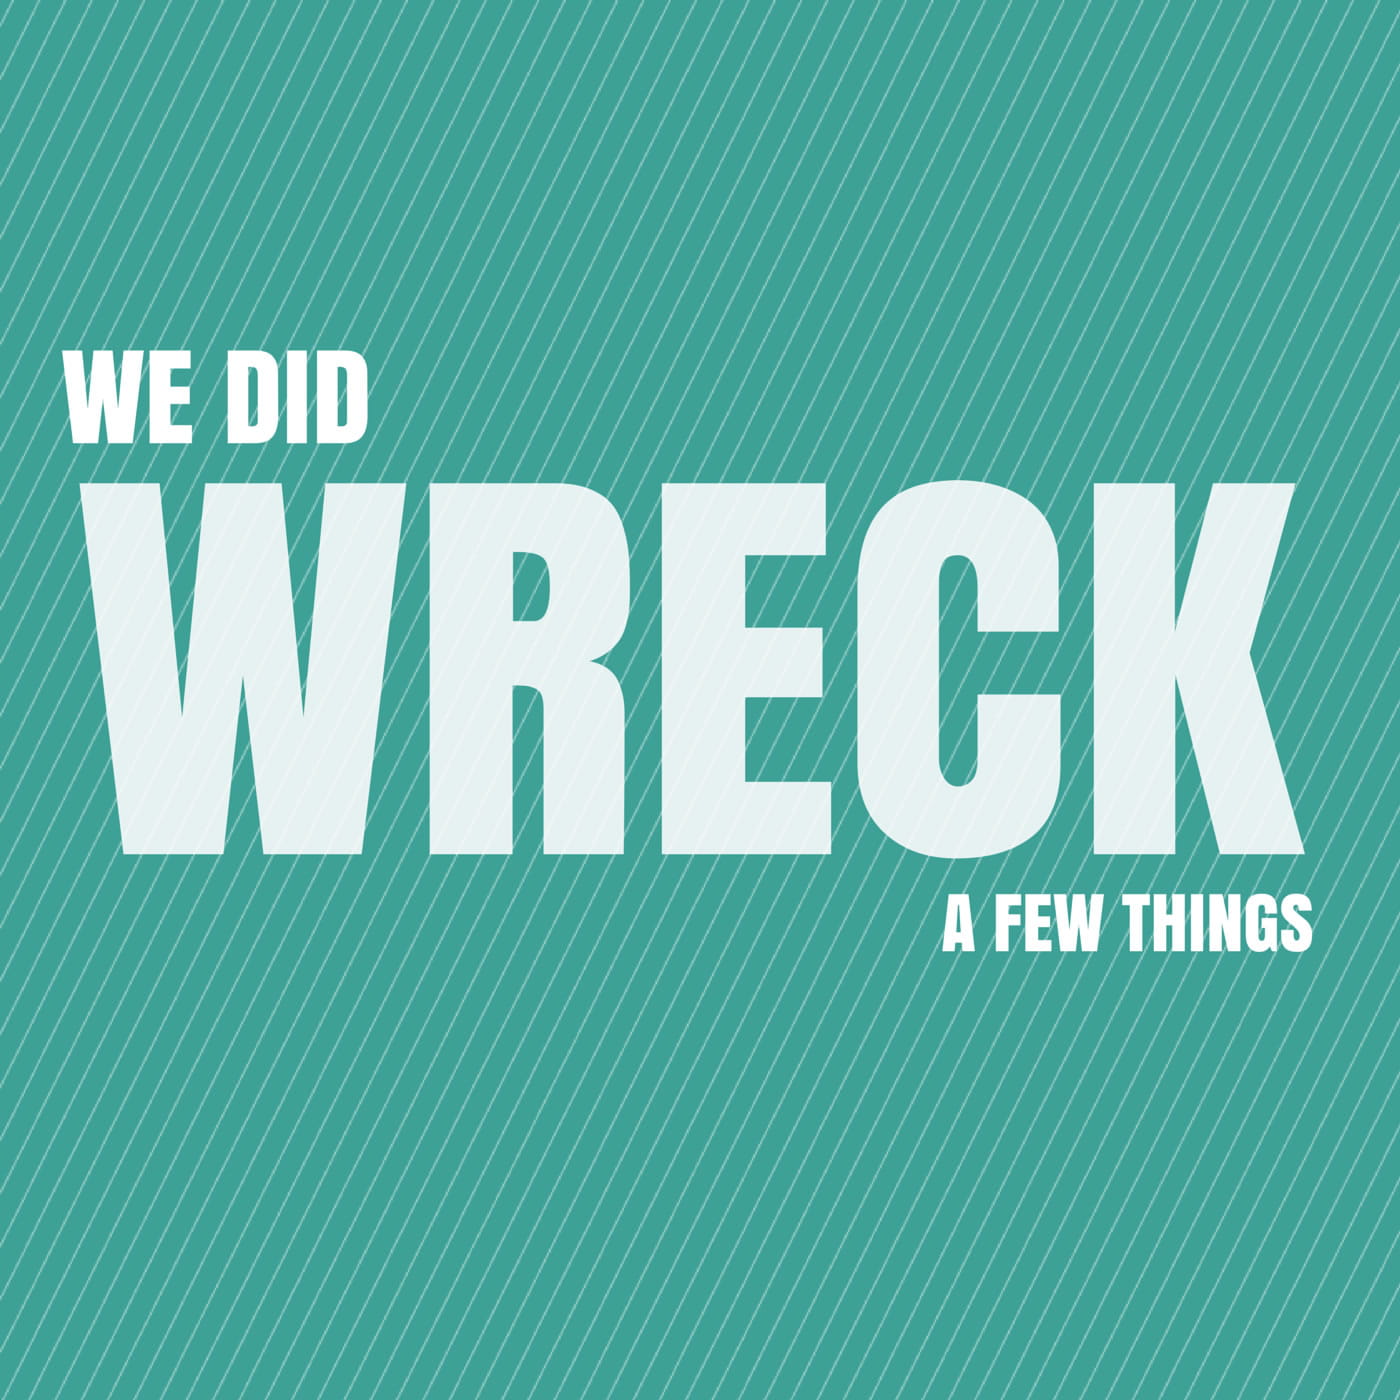 EP17: We did wreck a few things by Justin Jackson